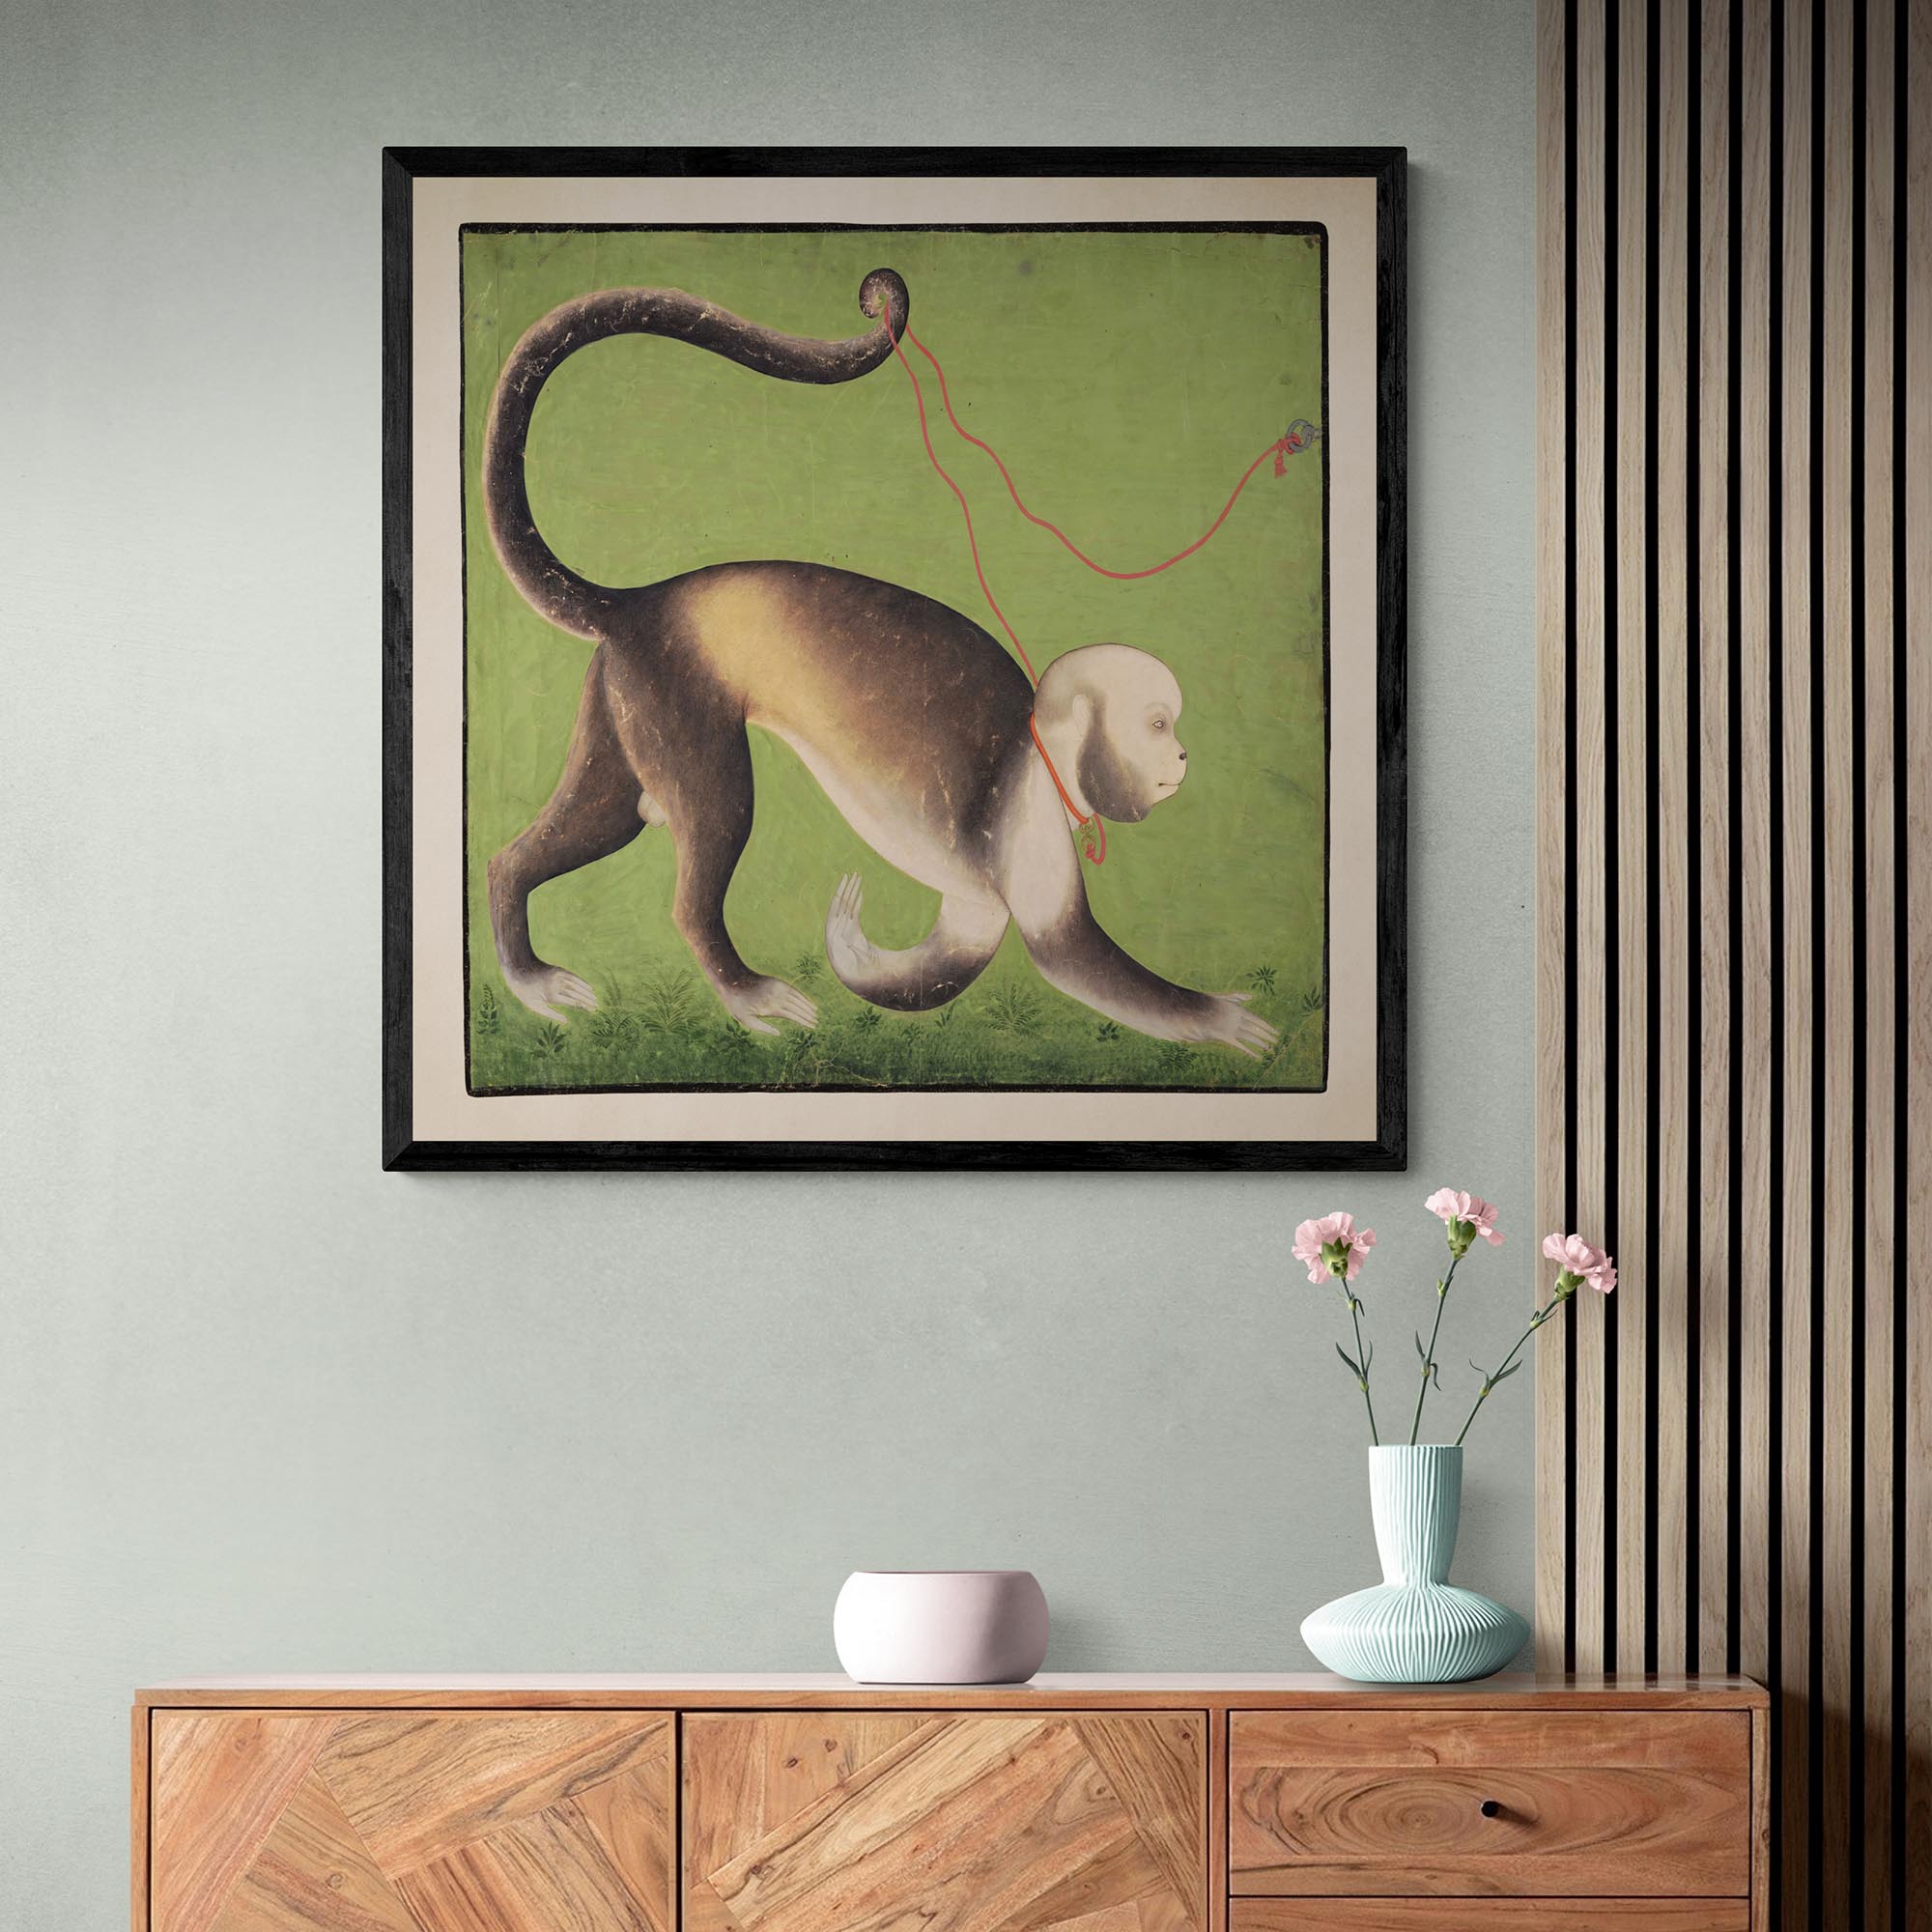 giclee A Monumental Portrait of a Monkey, Rajasthan, Antique India Ape Surreal Asian Green Woodblock Fine Art Print